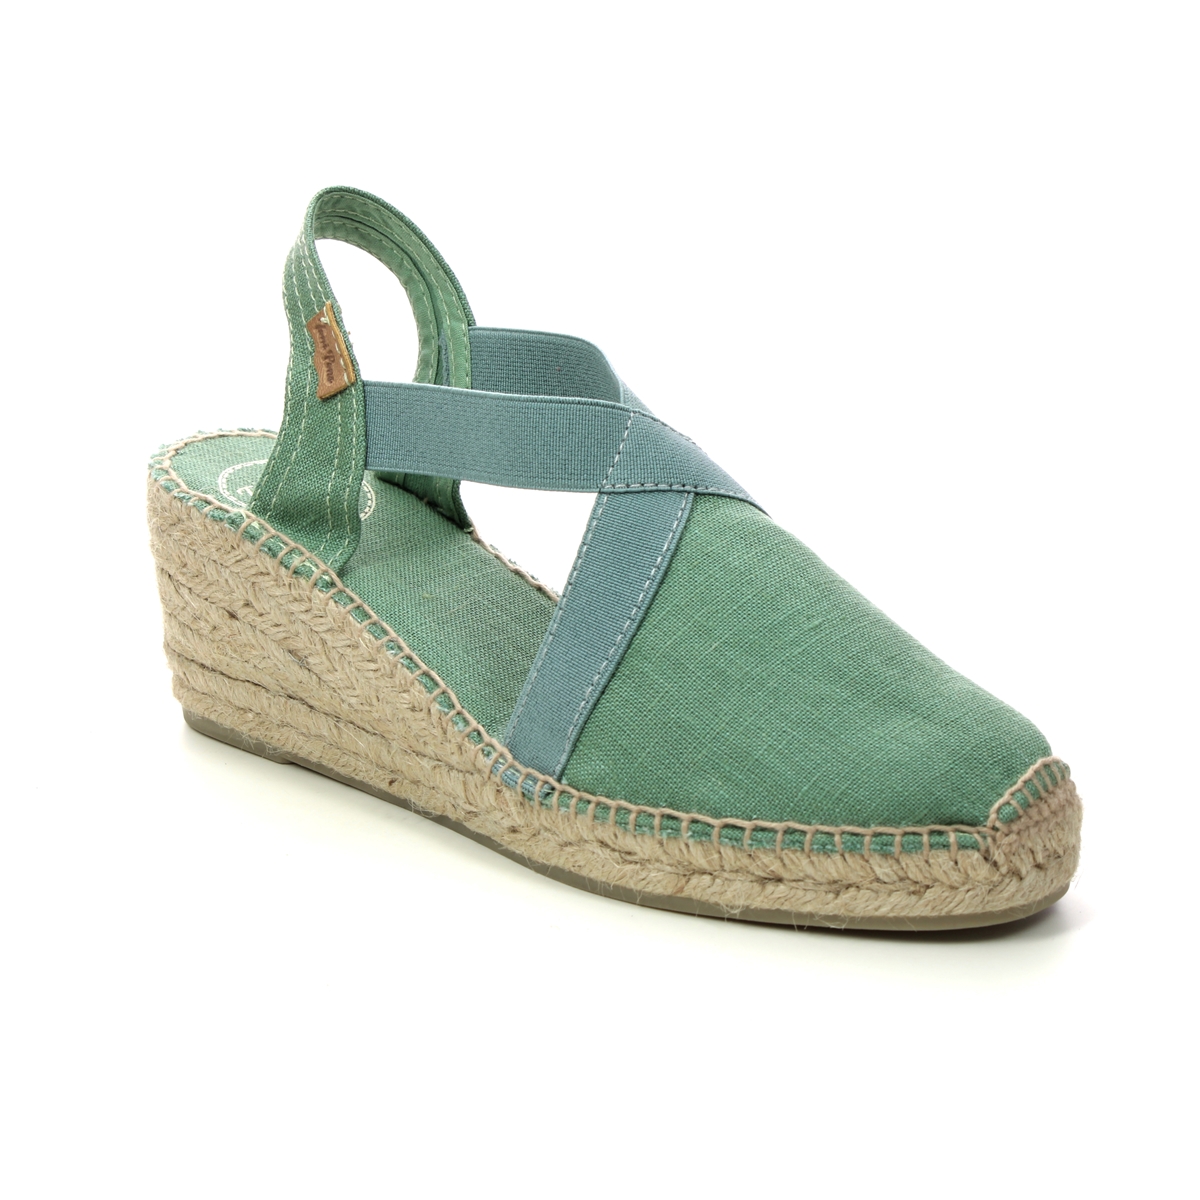 Toni Pons Ter Mint green Womens Espadrilles 1003-91 in a Plain Textile in Size 39